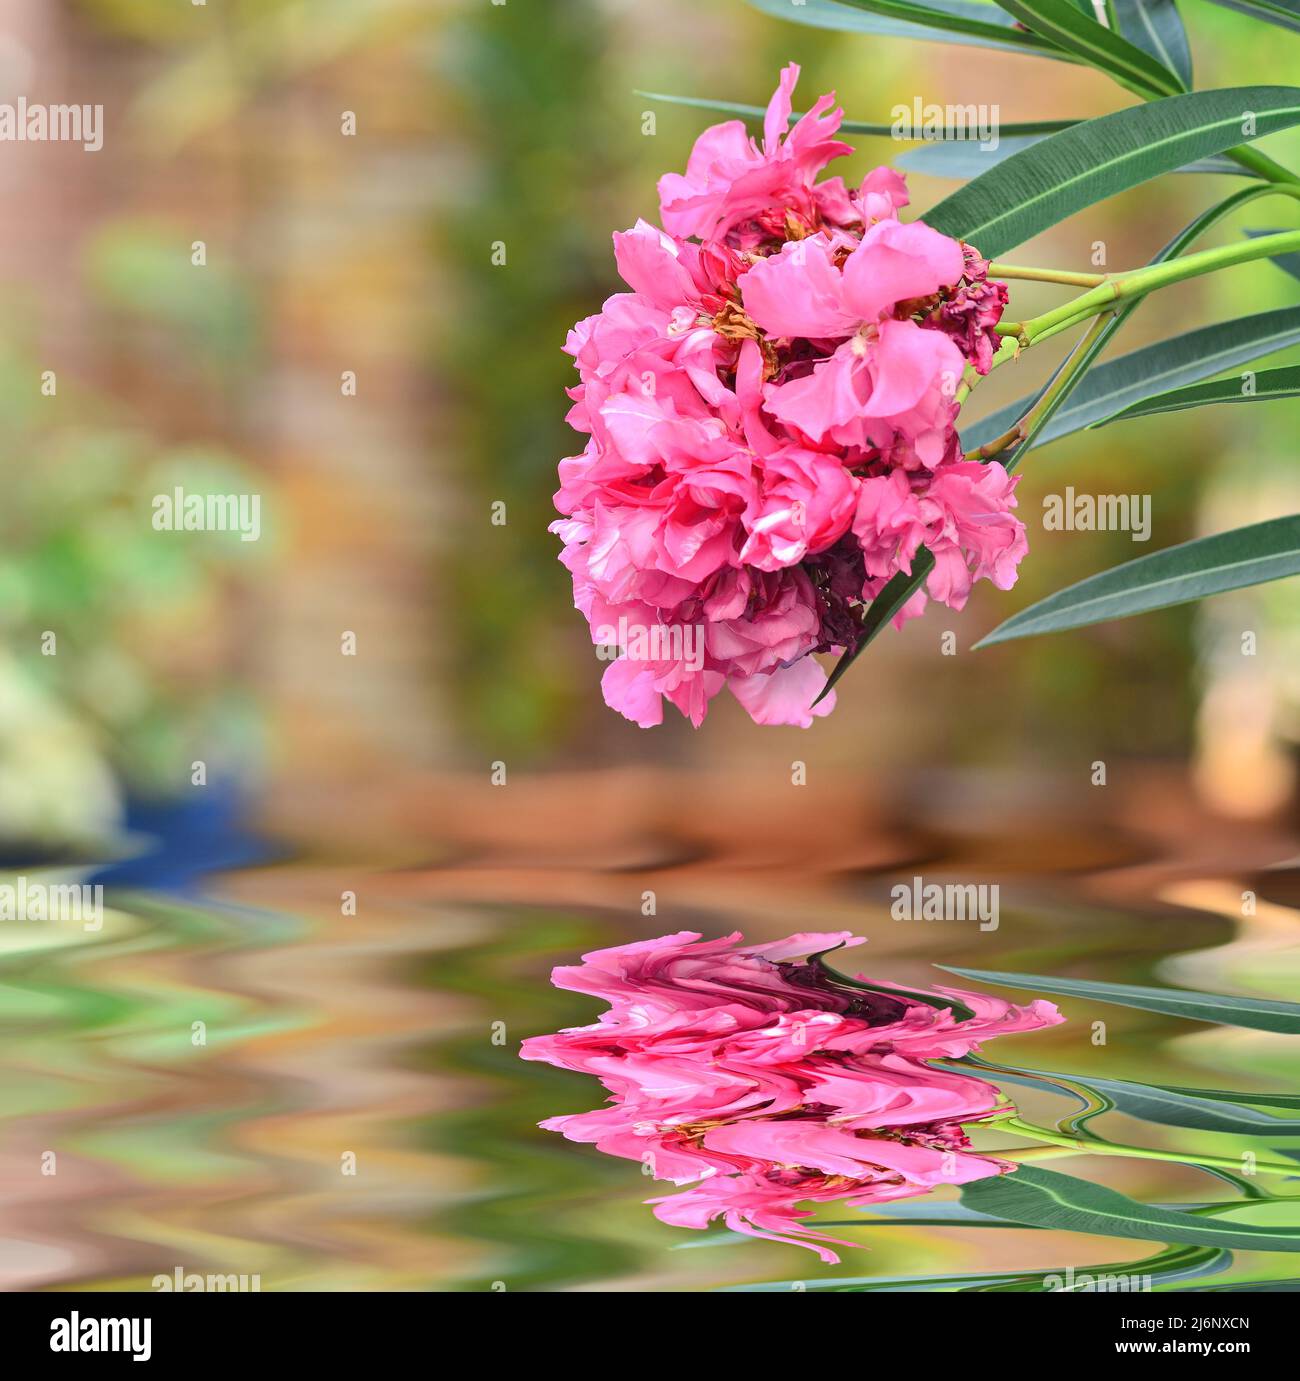 Beautiful Rose Bay bloom in garden with reflection Stock Photo